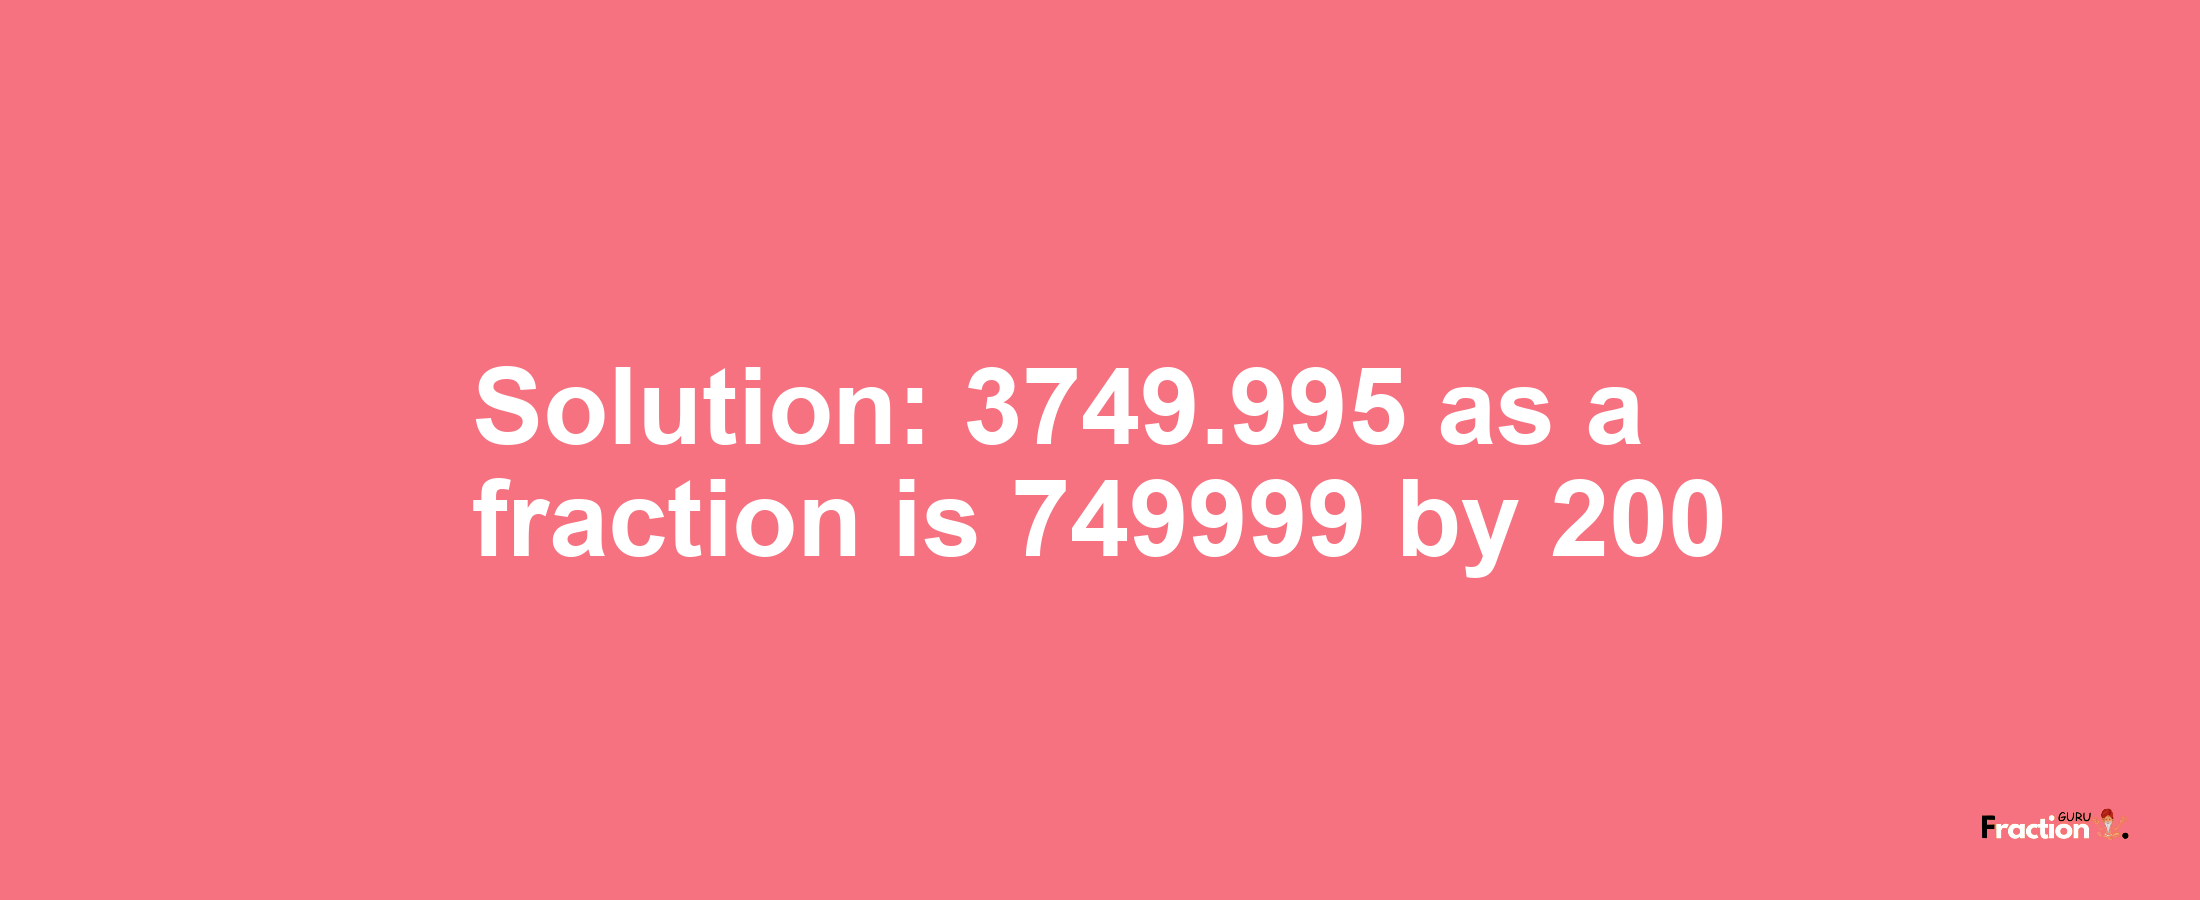 Solution:3749.995 as a fraction is 749999/200